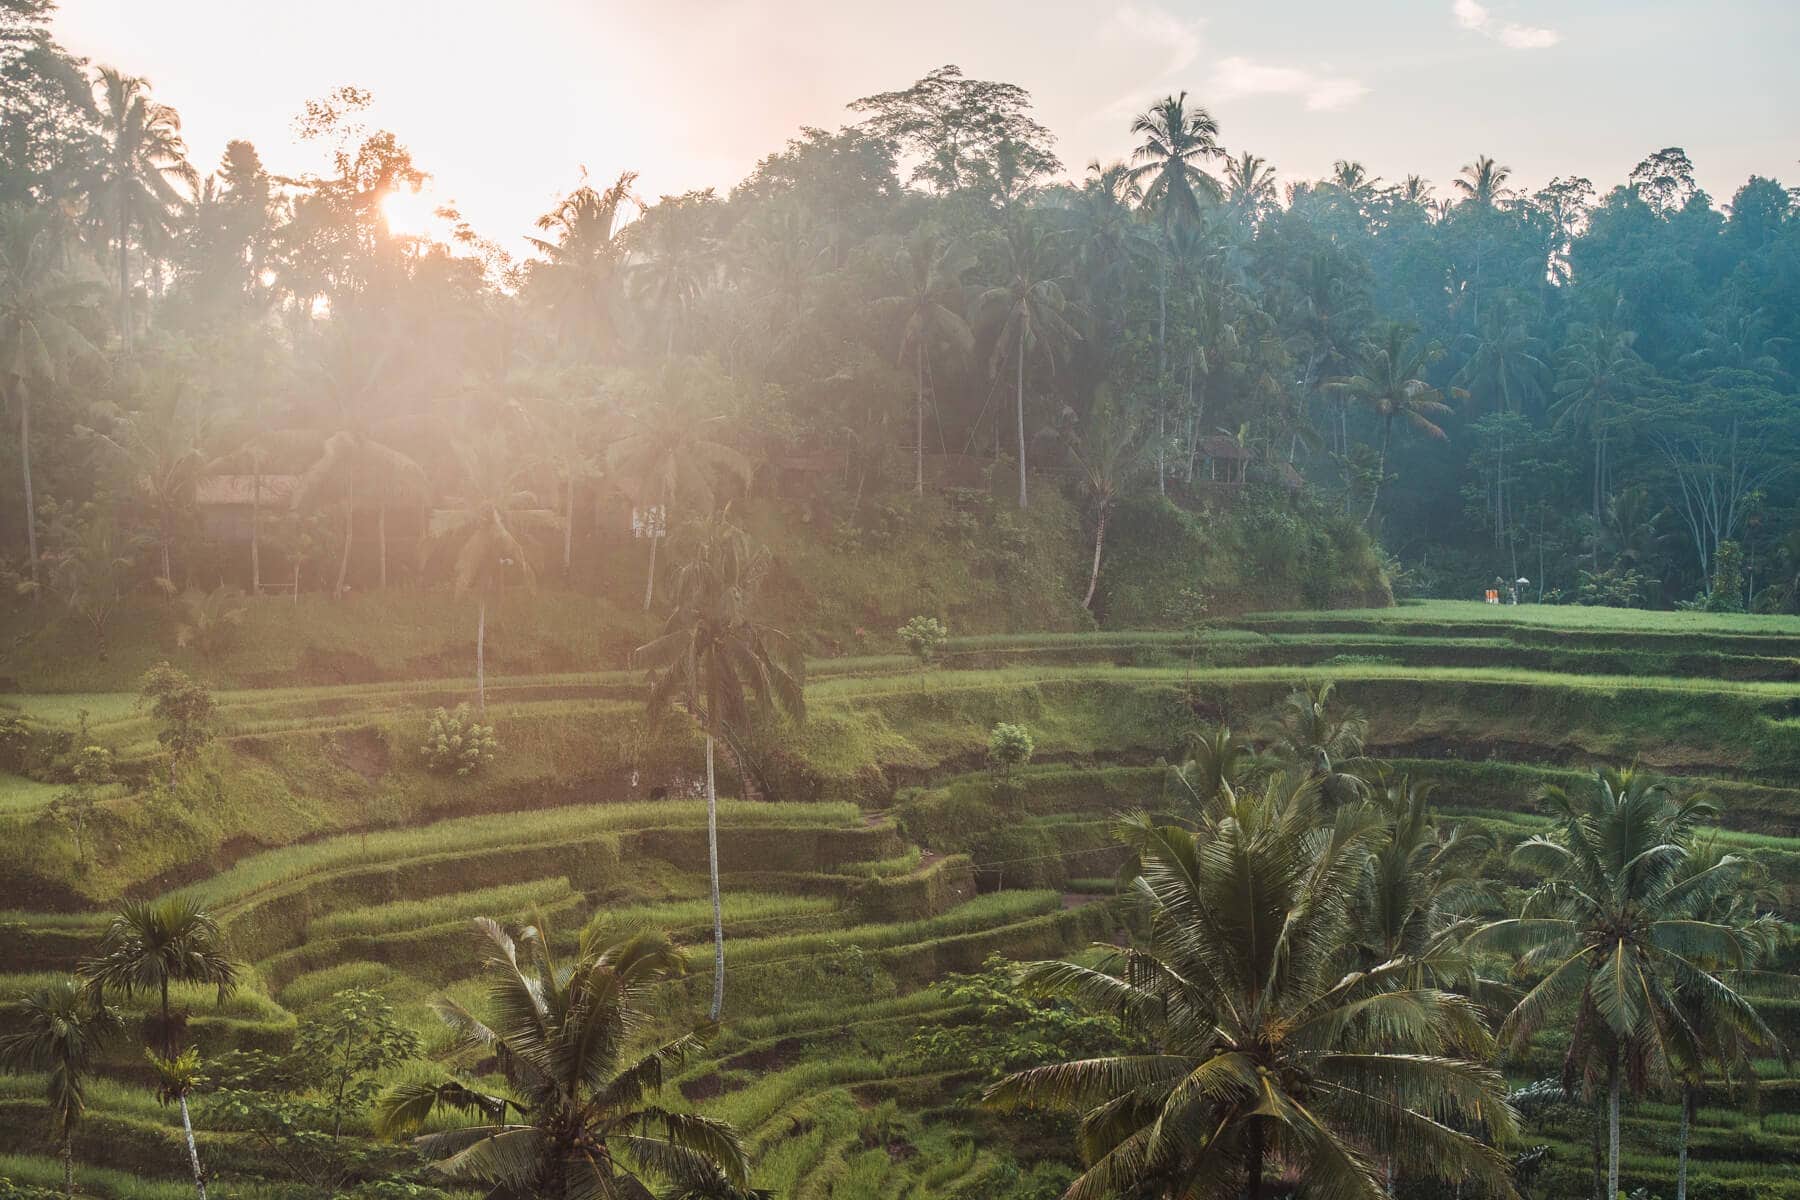 Bali Instagram captions - Early morning in Tegalalang Rice Terrace in Ubud